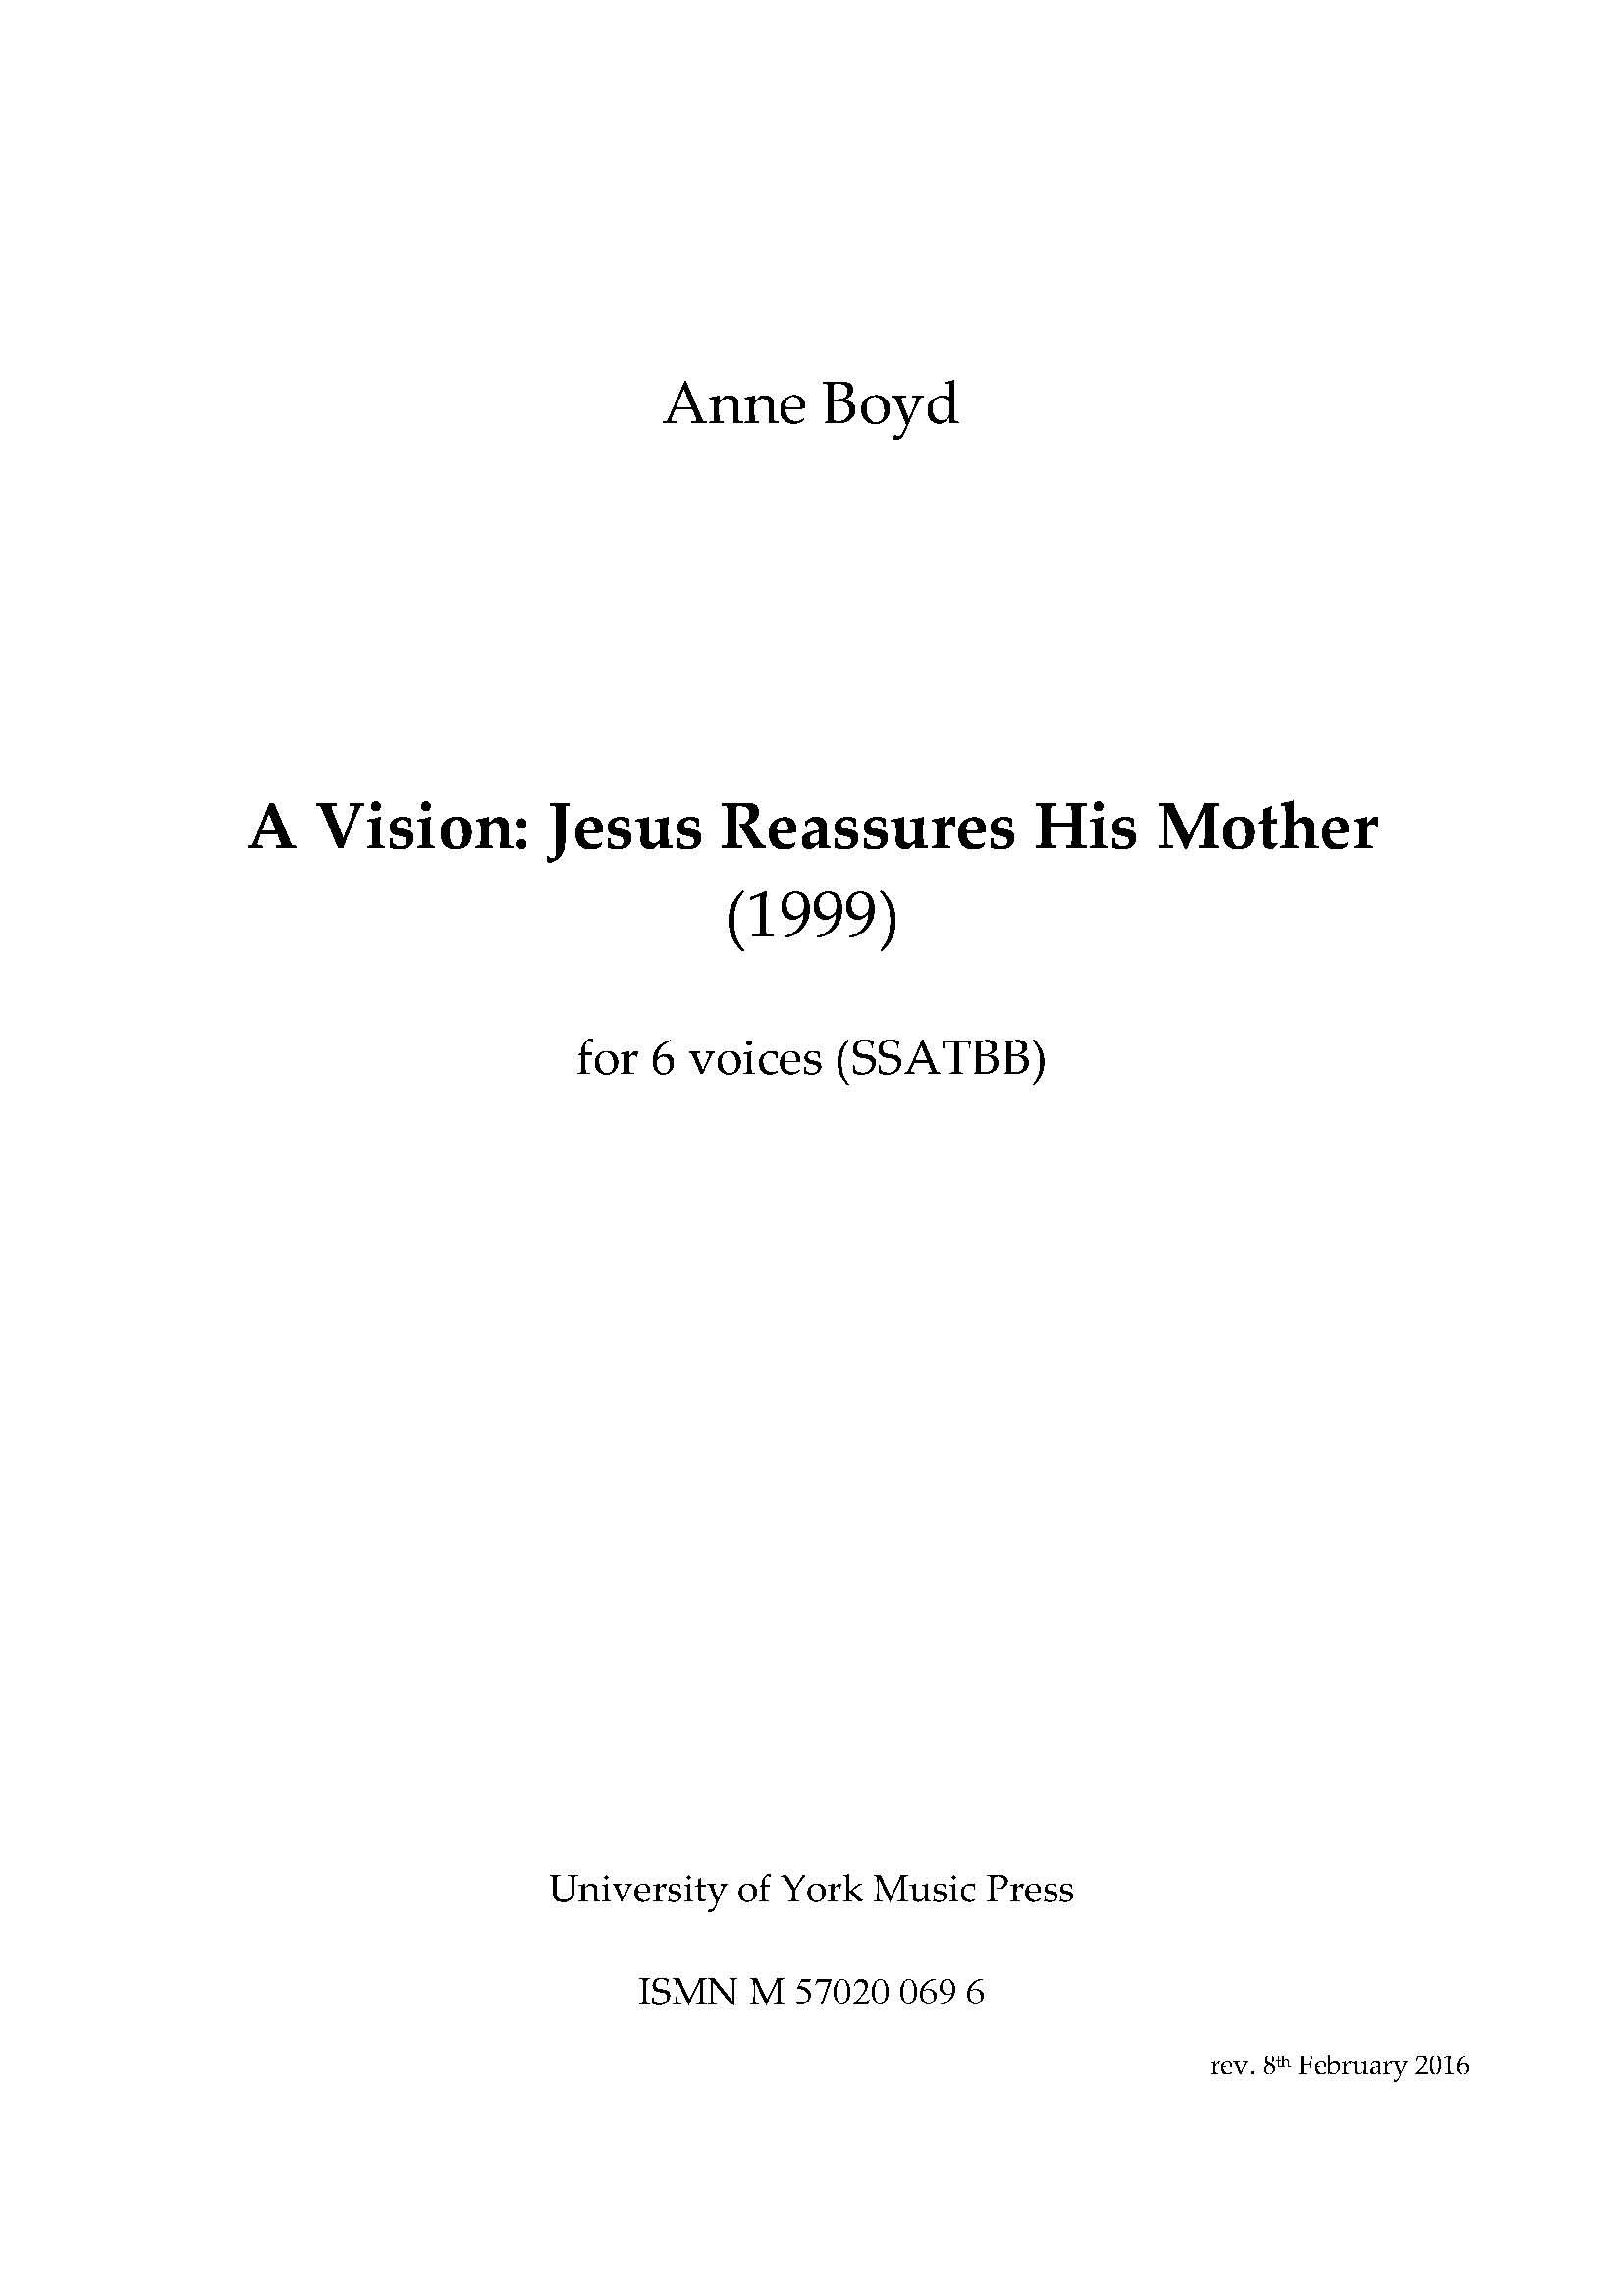 Anne Boyd: A Vision - Jesus Reassures His Mother: SATB: Vocal Score